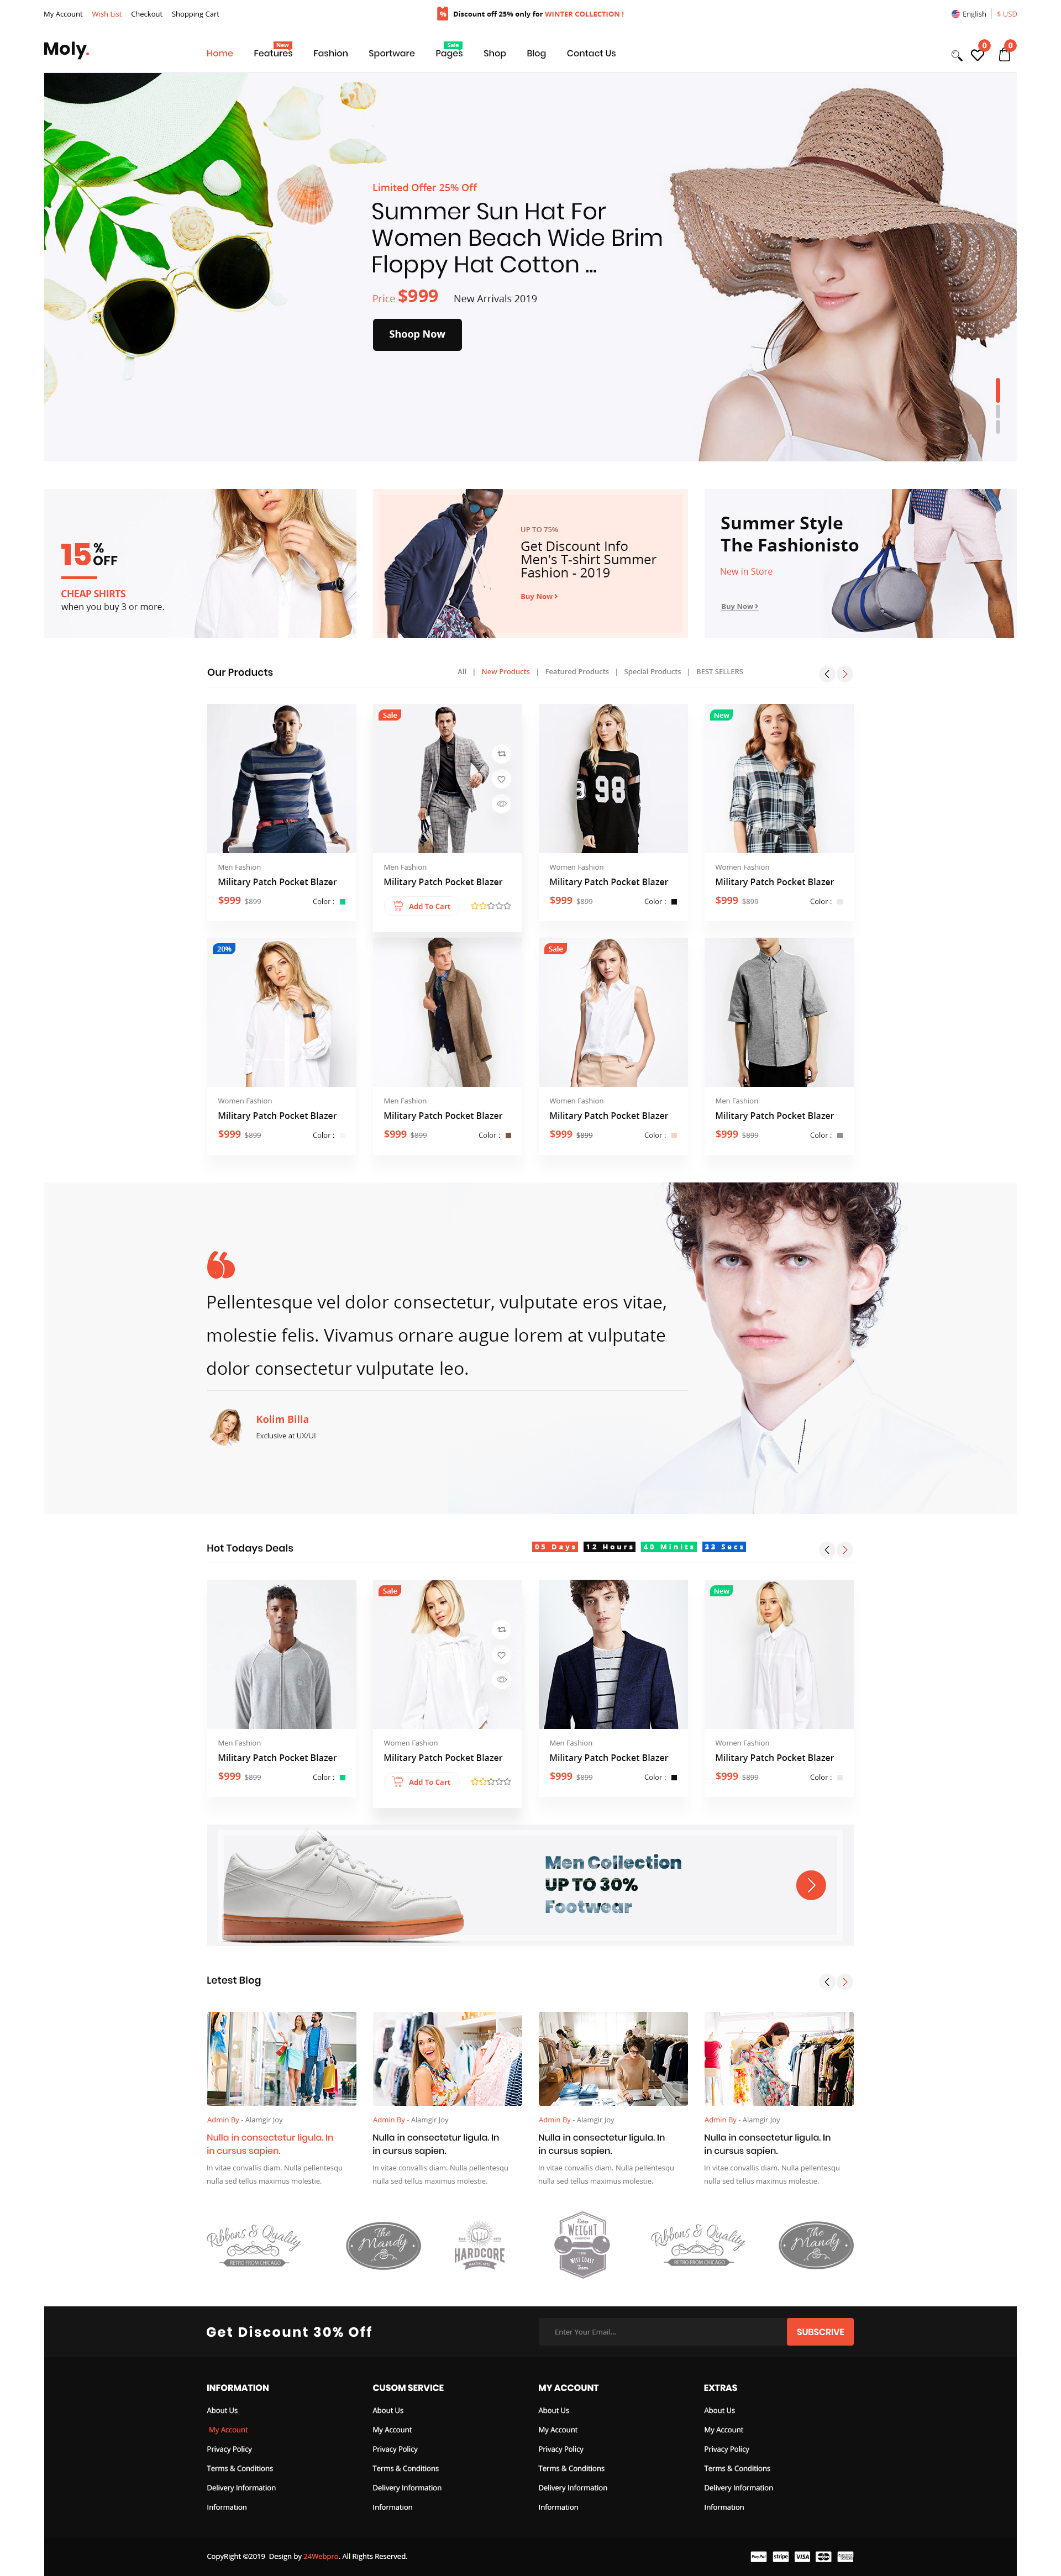 Moly - eCommerce Fashion PSD Template. by creativemela | ThemeForest